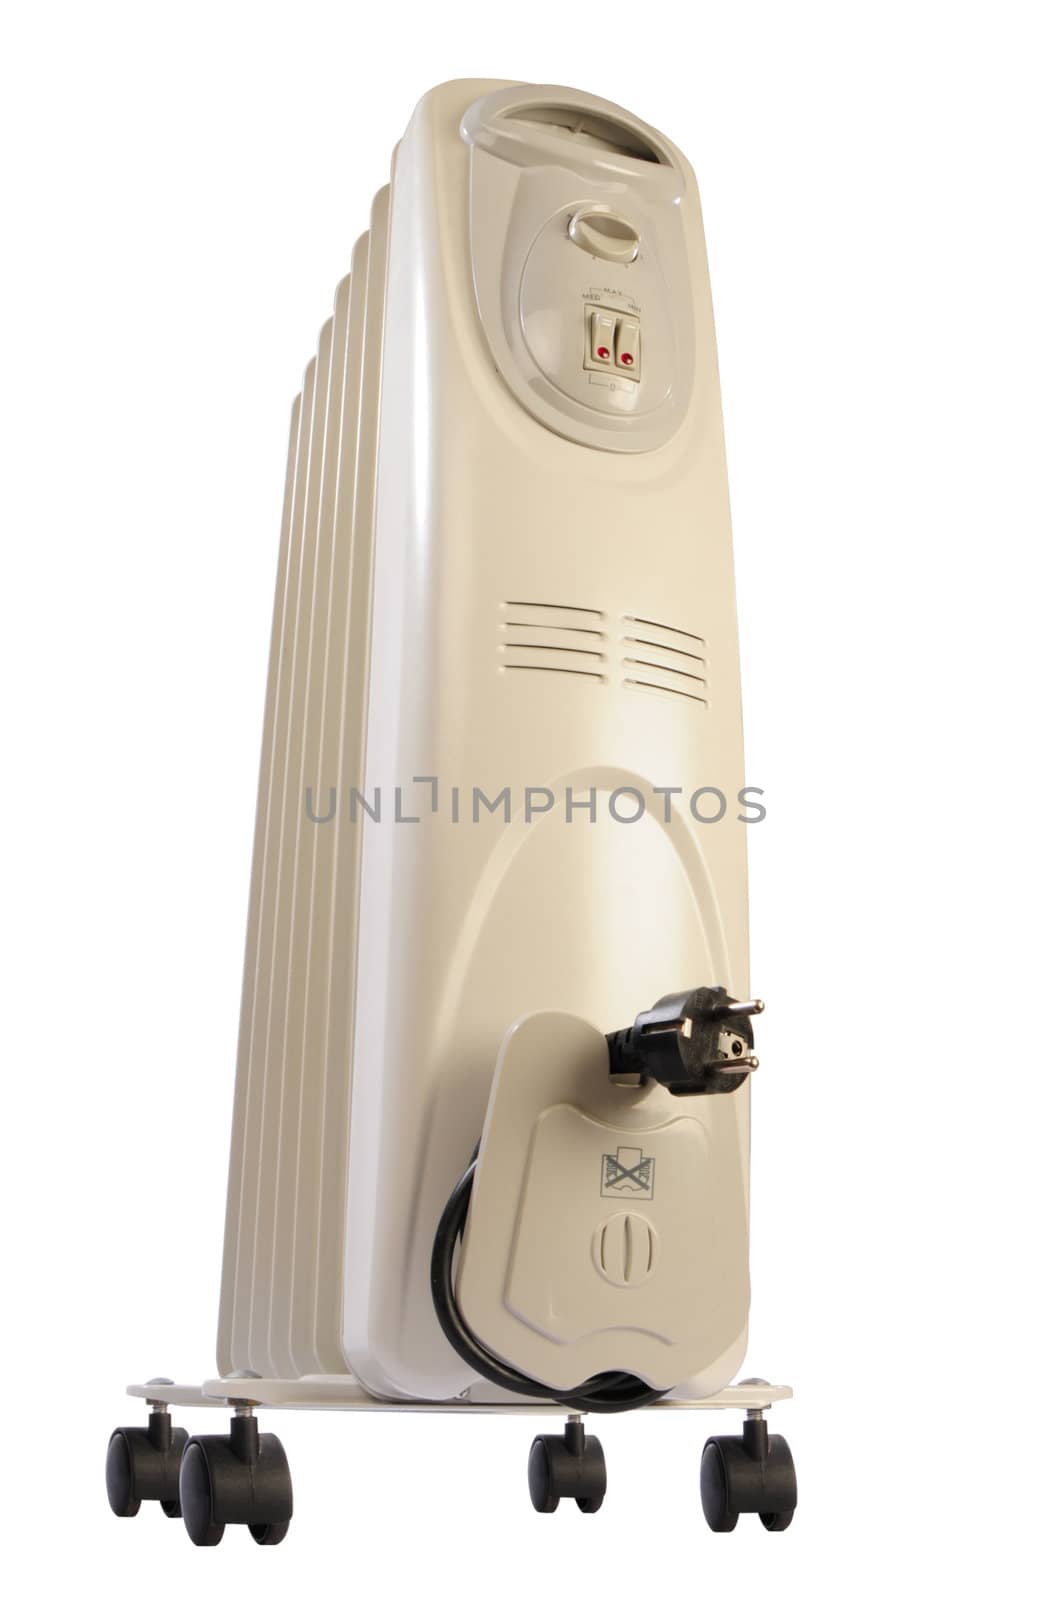 Electric oil heater with clipping path by dyoma